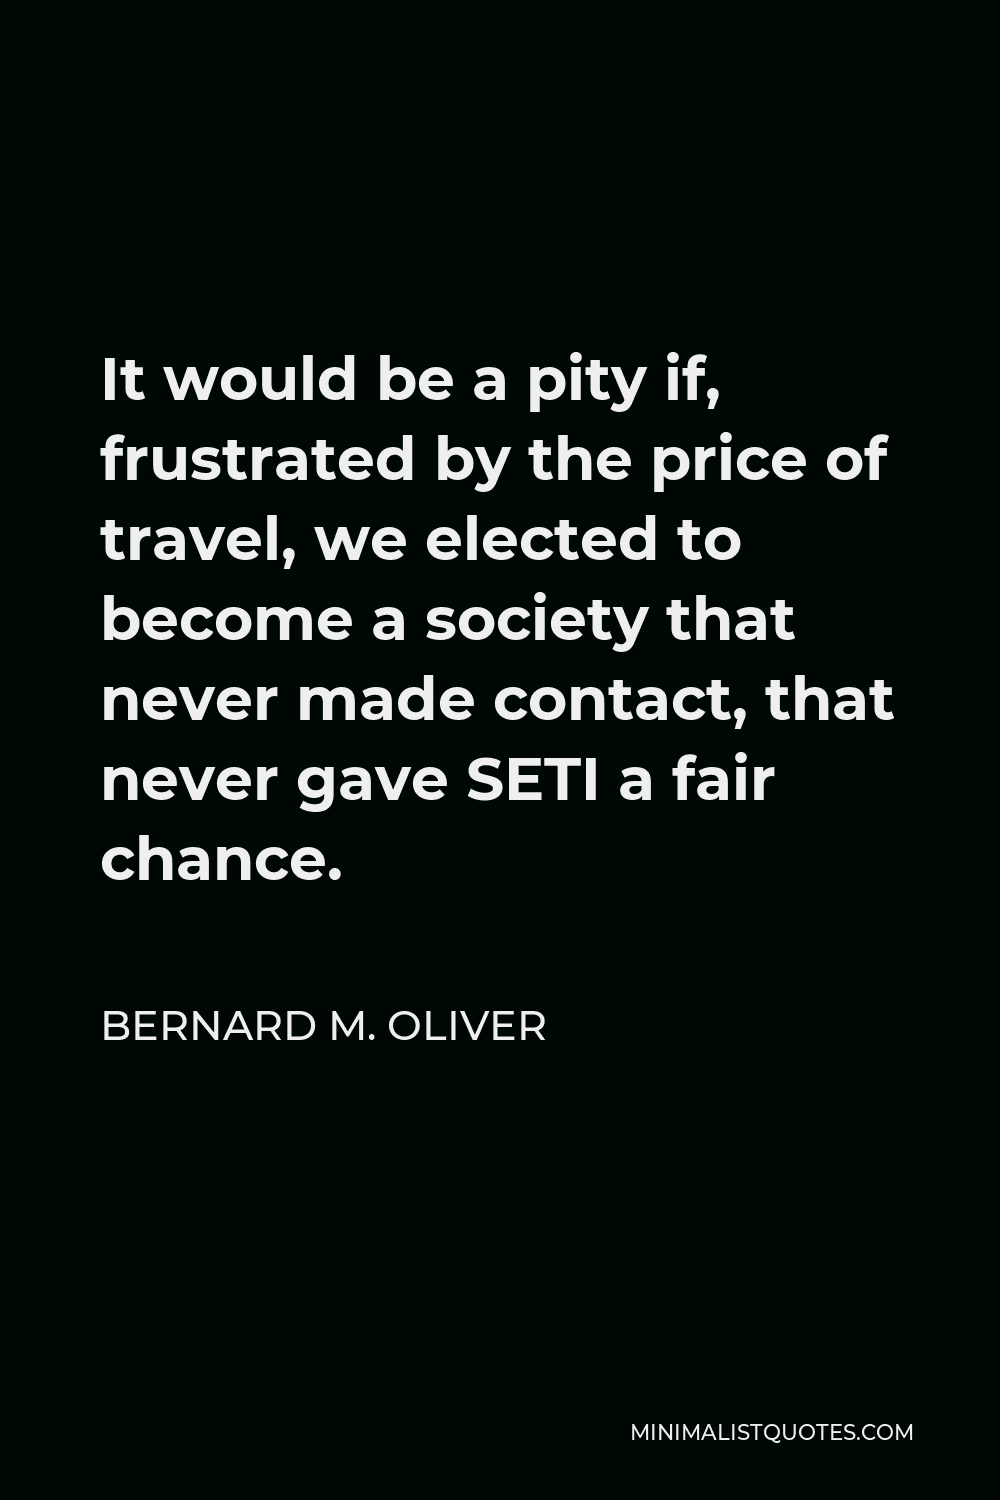 Bernard M. Oliver Quote - It would be a pity if, frustrated by the price of travel, we elected to become a society that never made contact, that never gave SETI a fair chance.